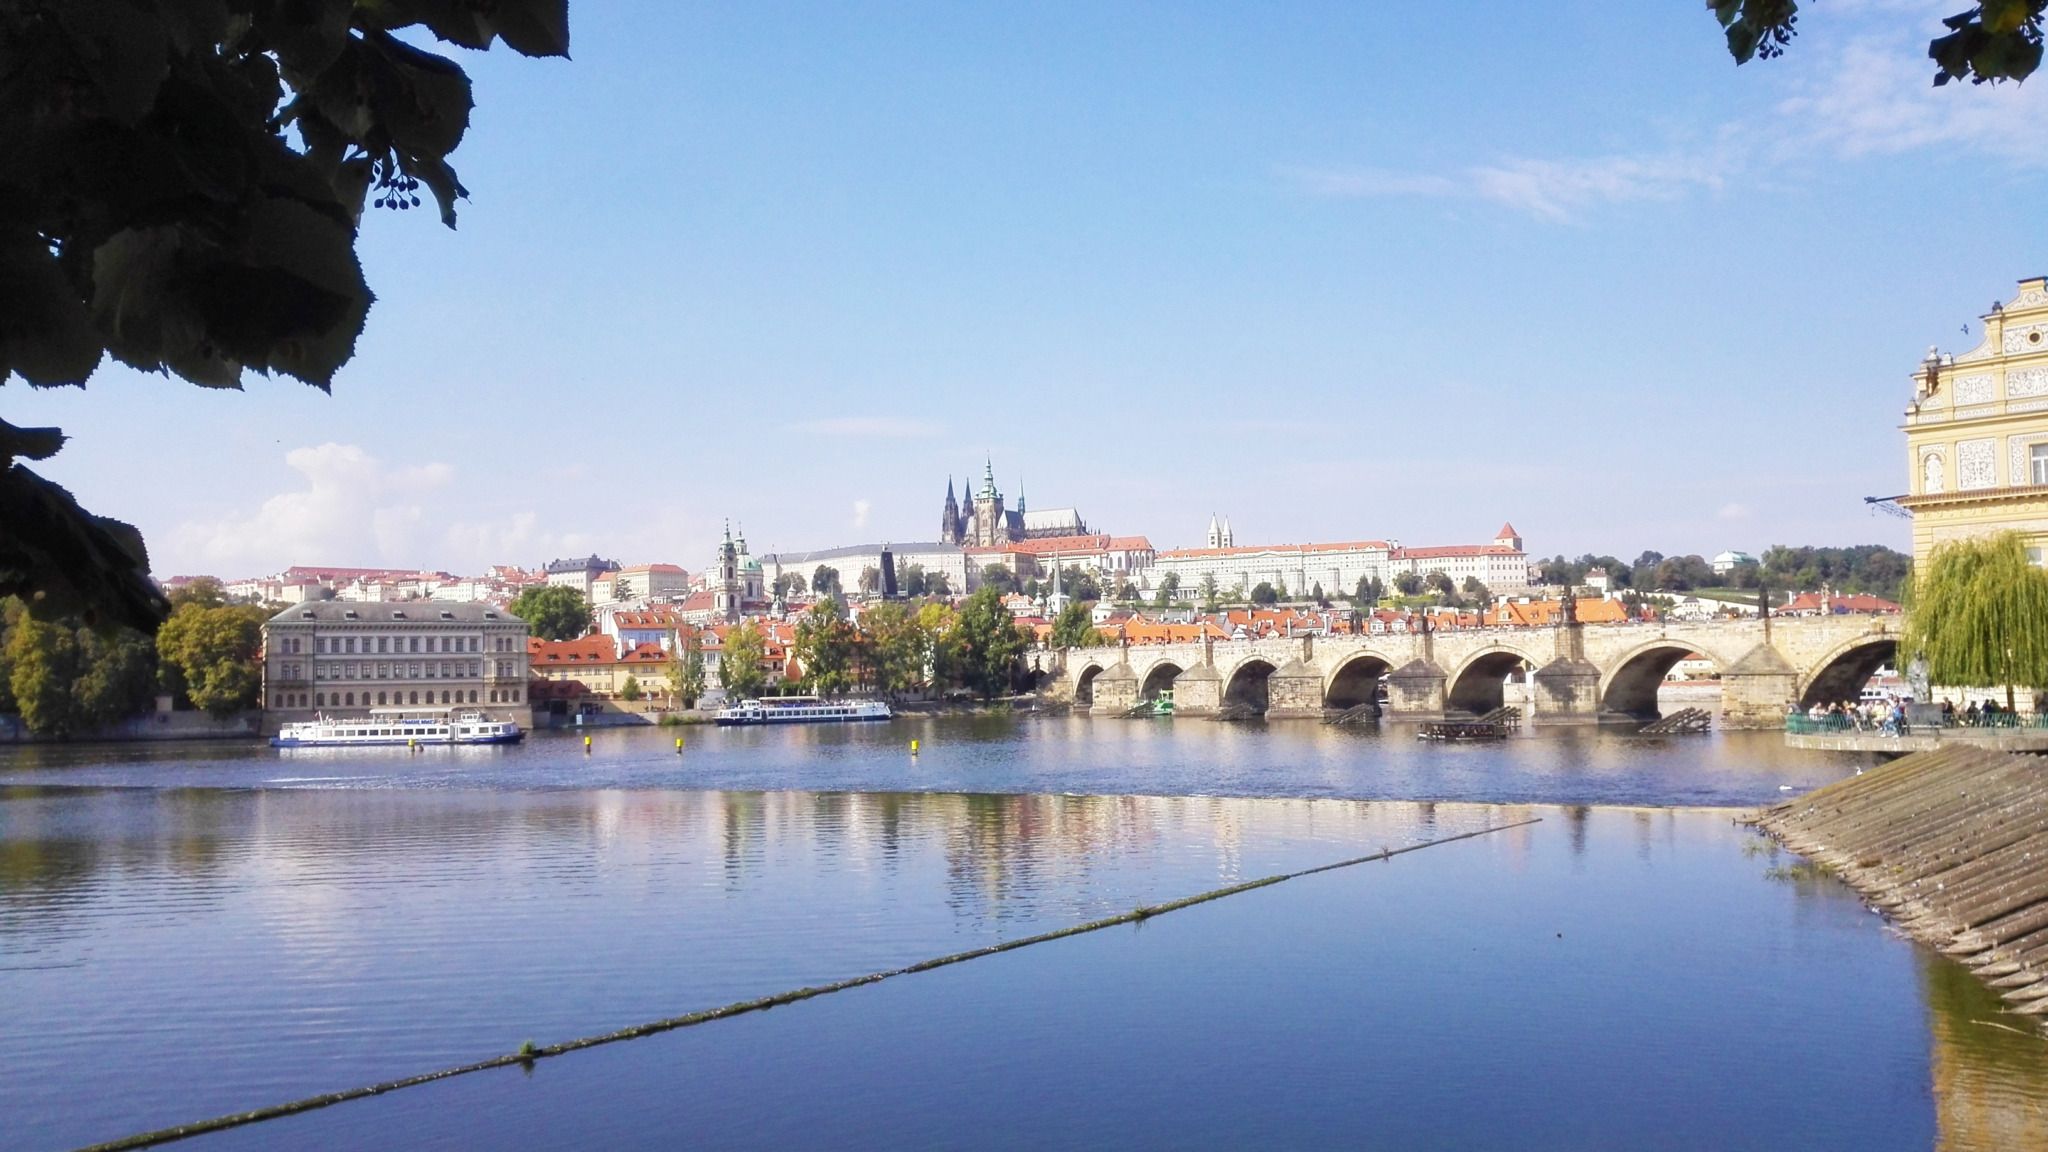 Look over to Prague castle and Charles bridge